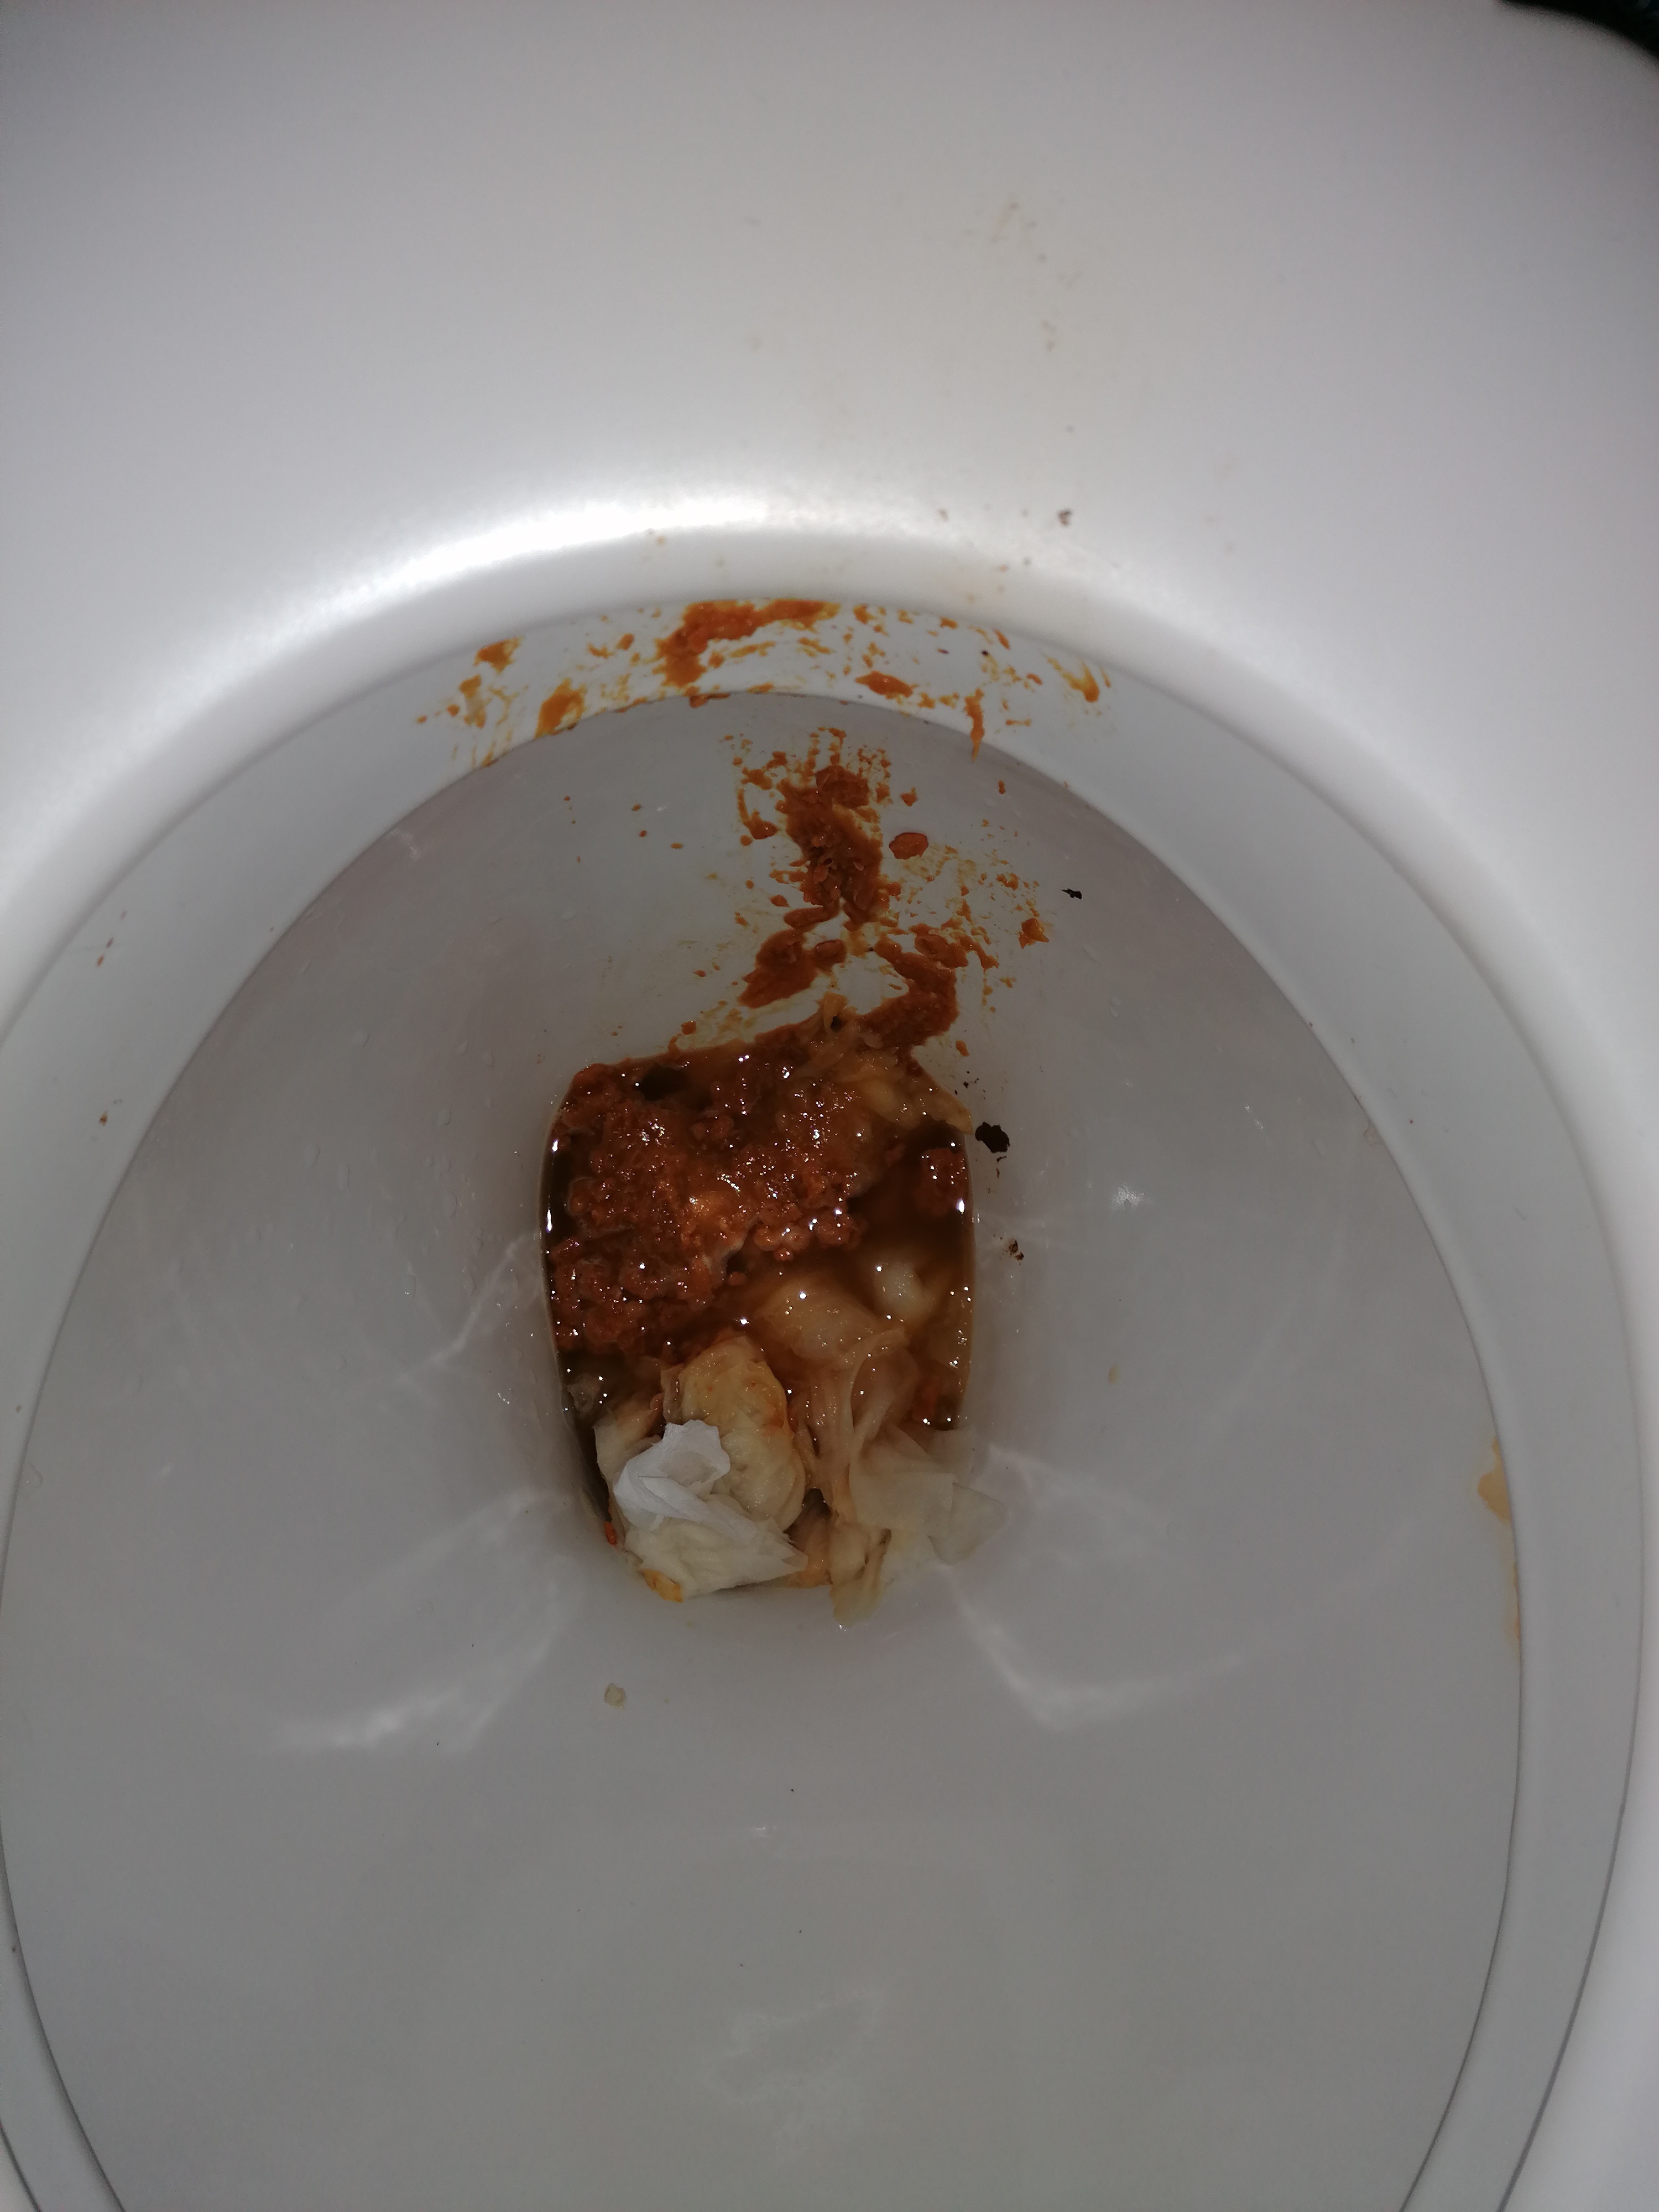 Seriously desperate sloppy after work shit